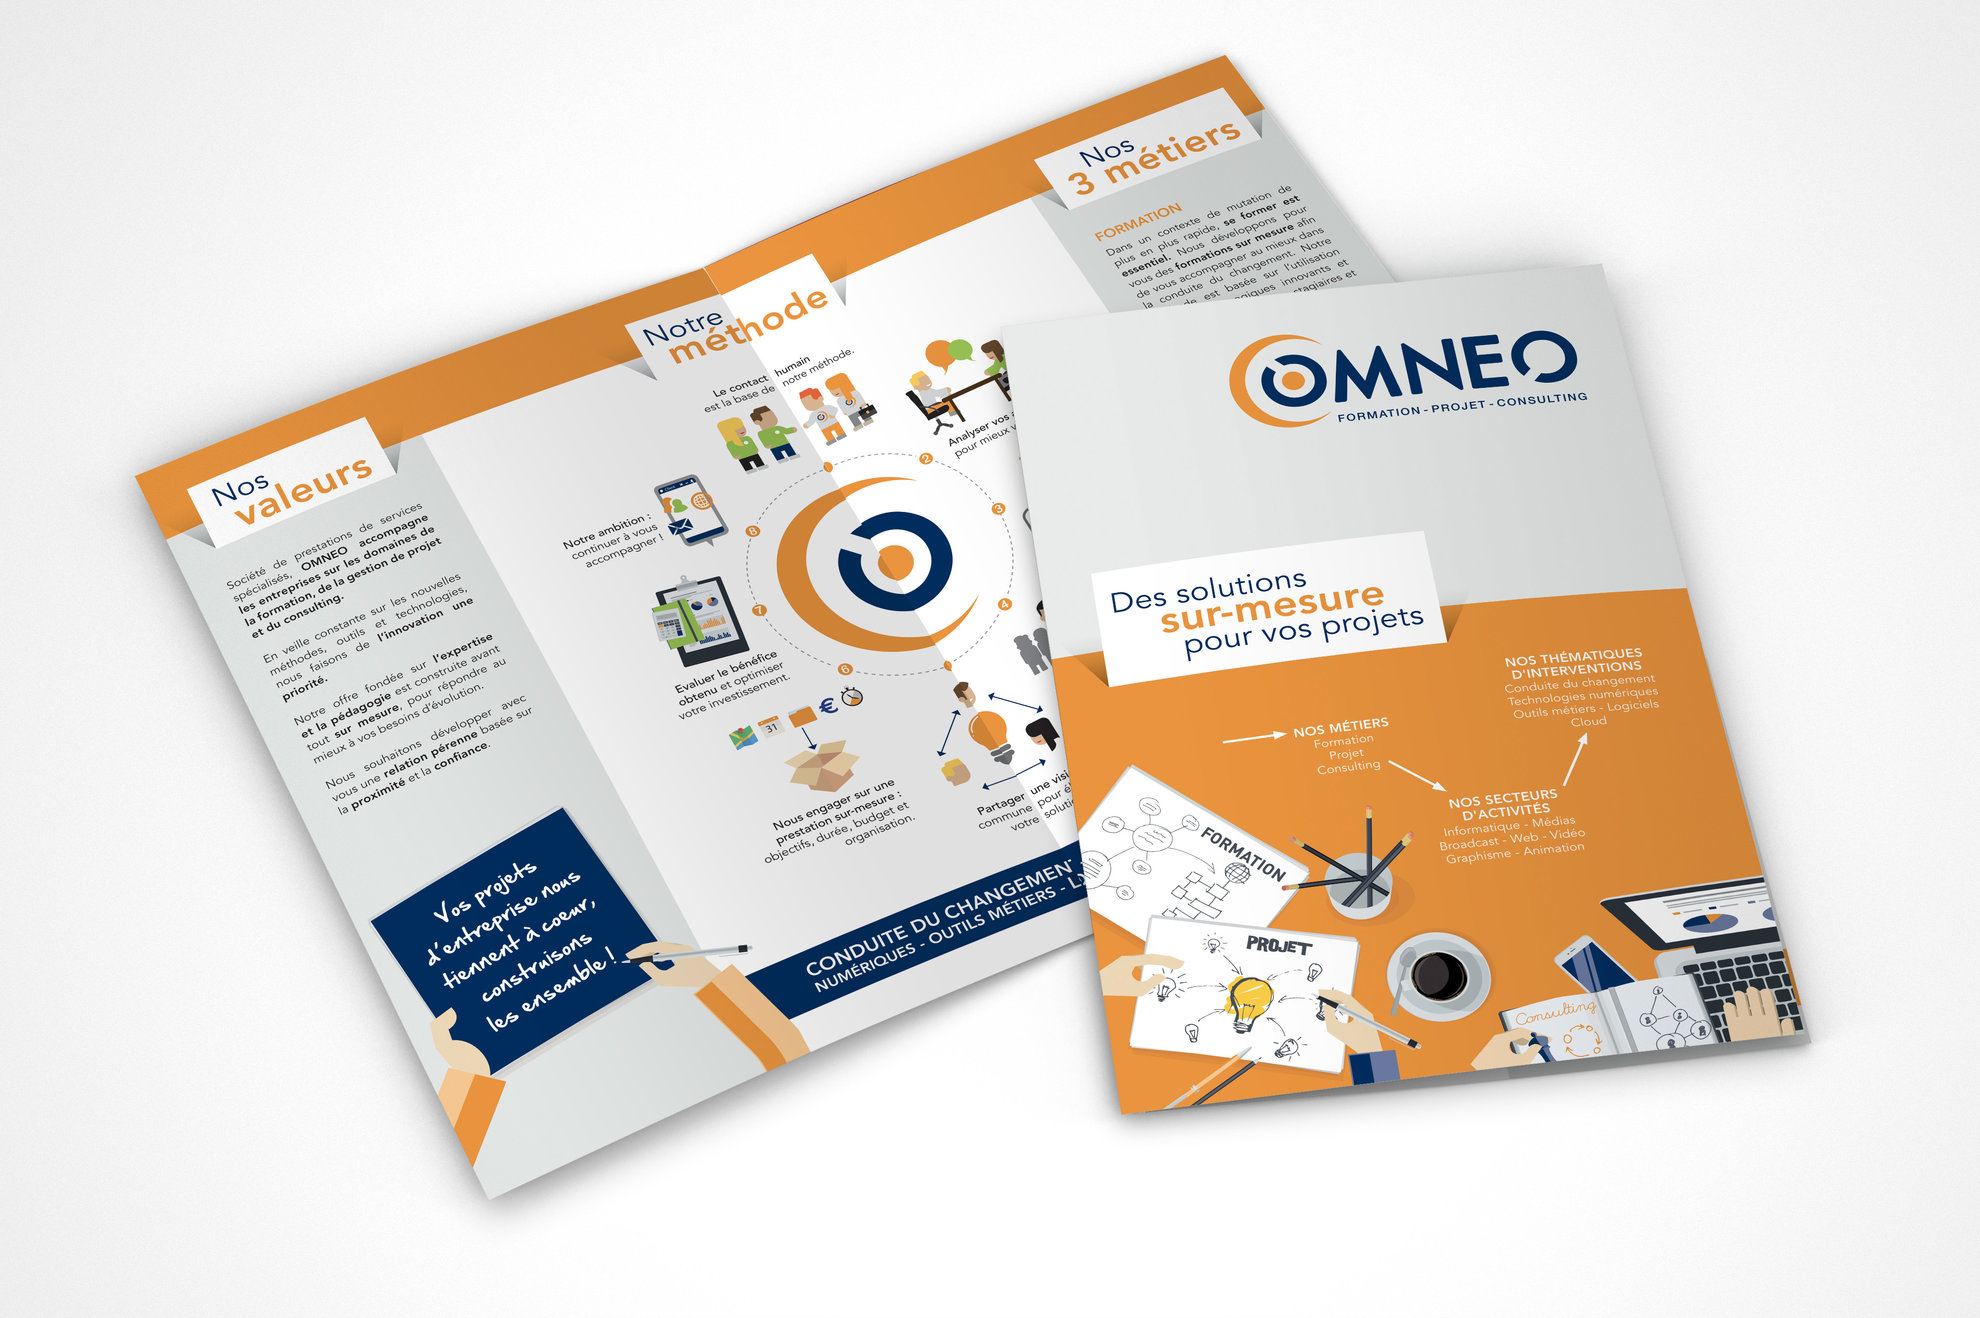 Plaquette OMNEO Formation